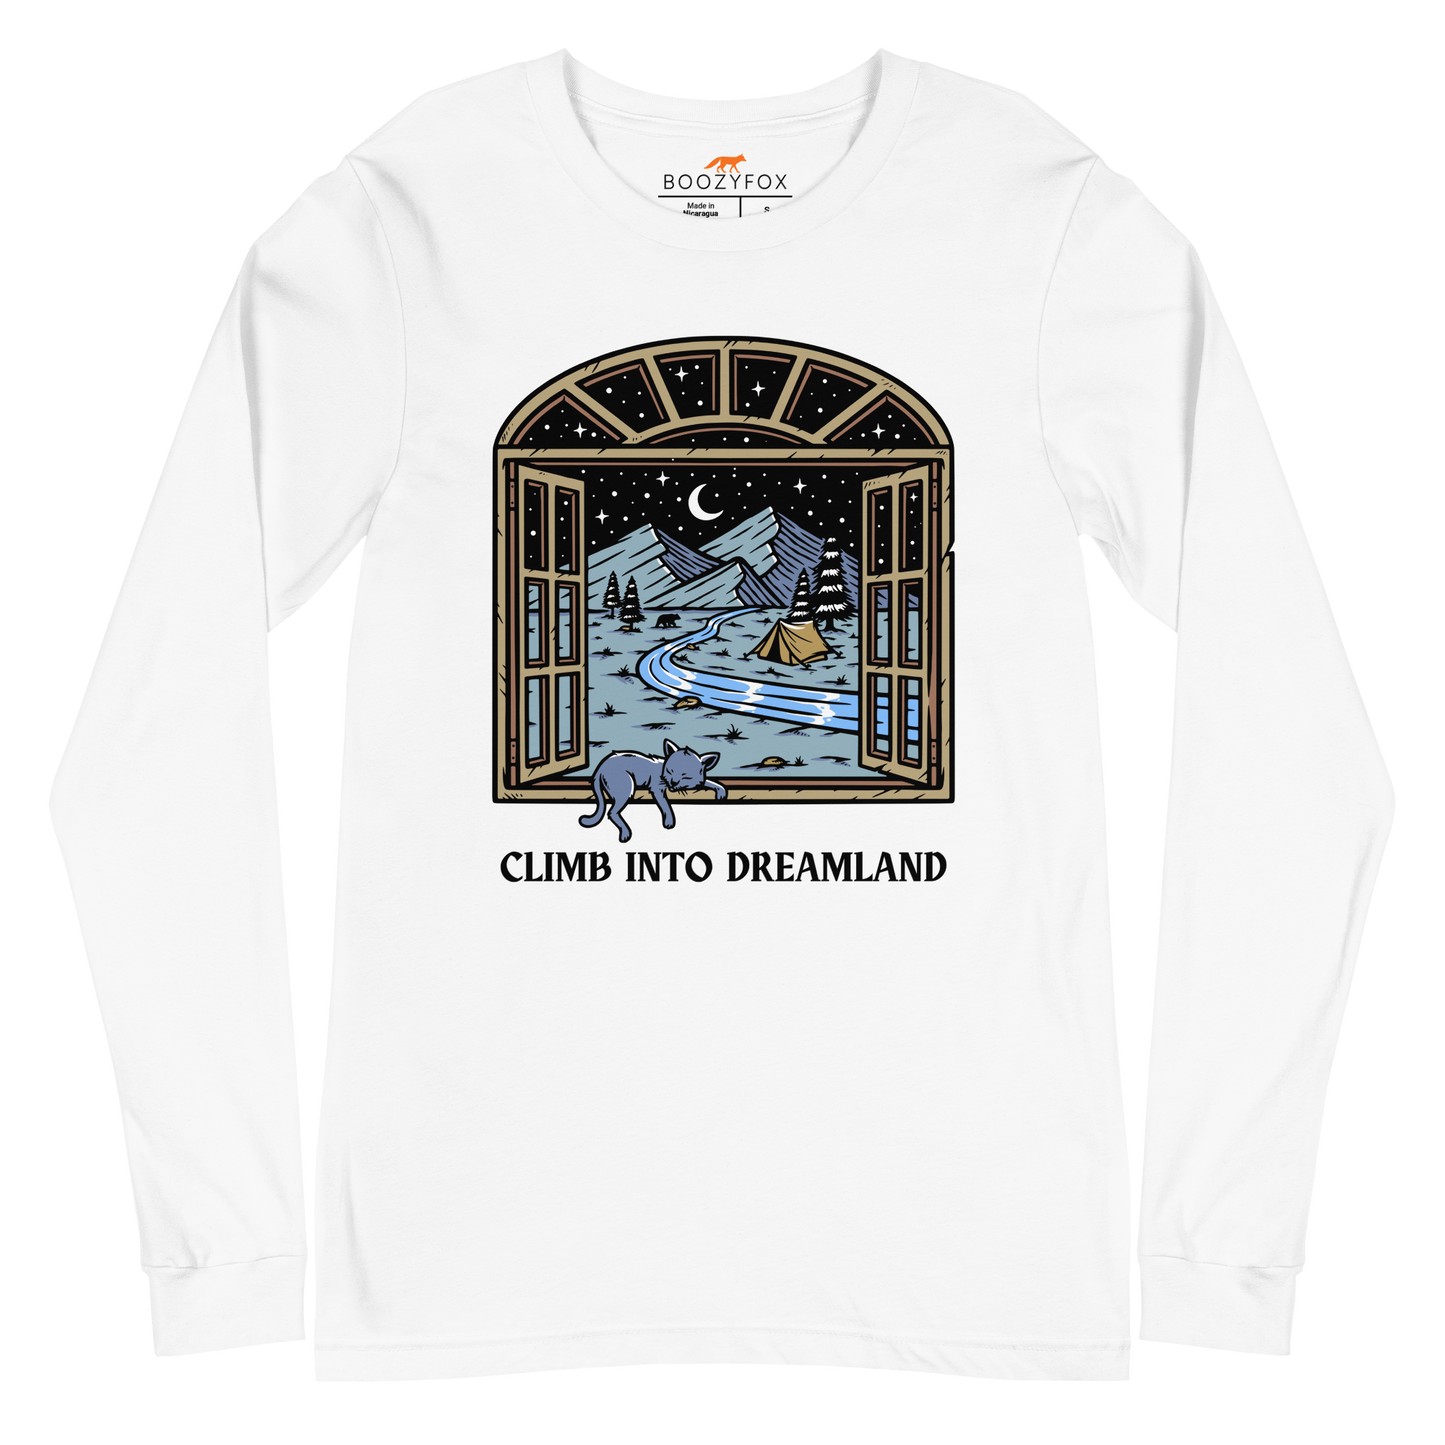 White Climb Into Dreamland Long Sleeve Tee featuring a mesmerizing mountain view graphic on the chest - Cool Nature Long Sleeve Graphic Tees - Boozy Fox